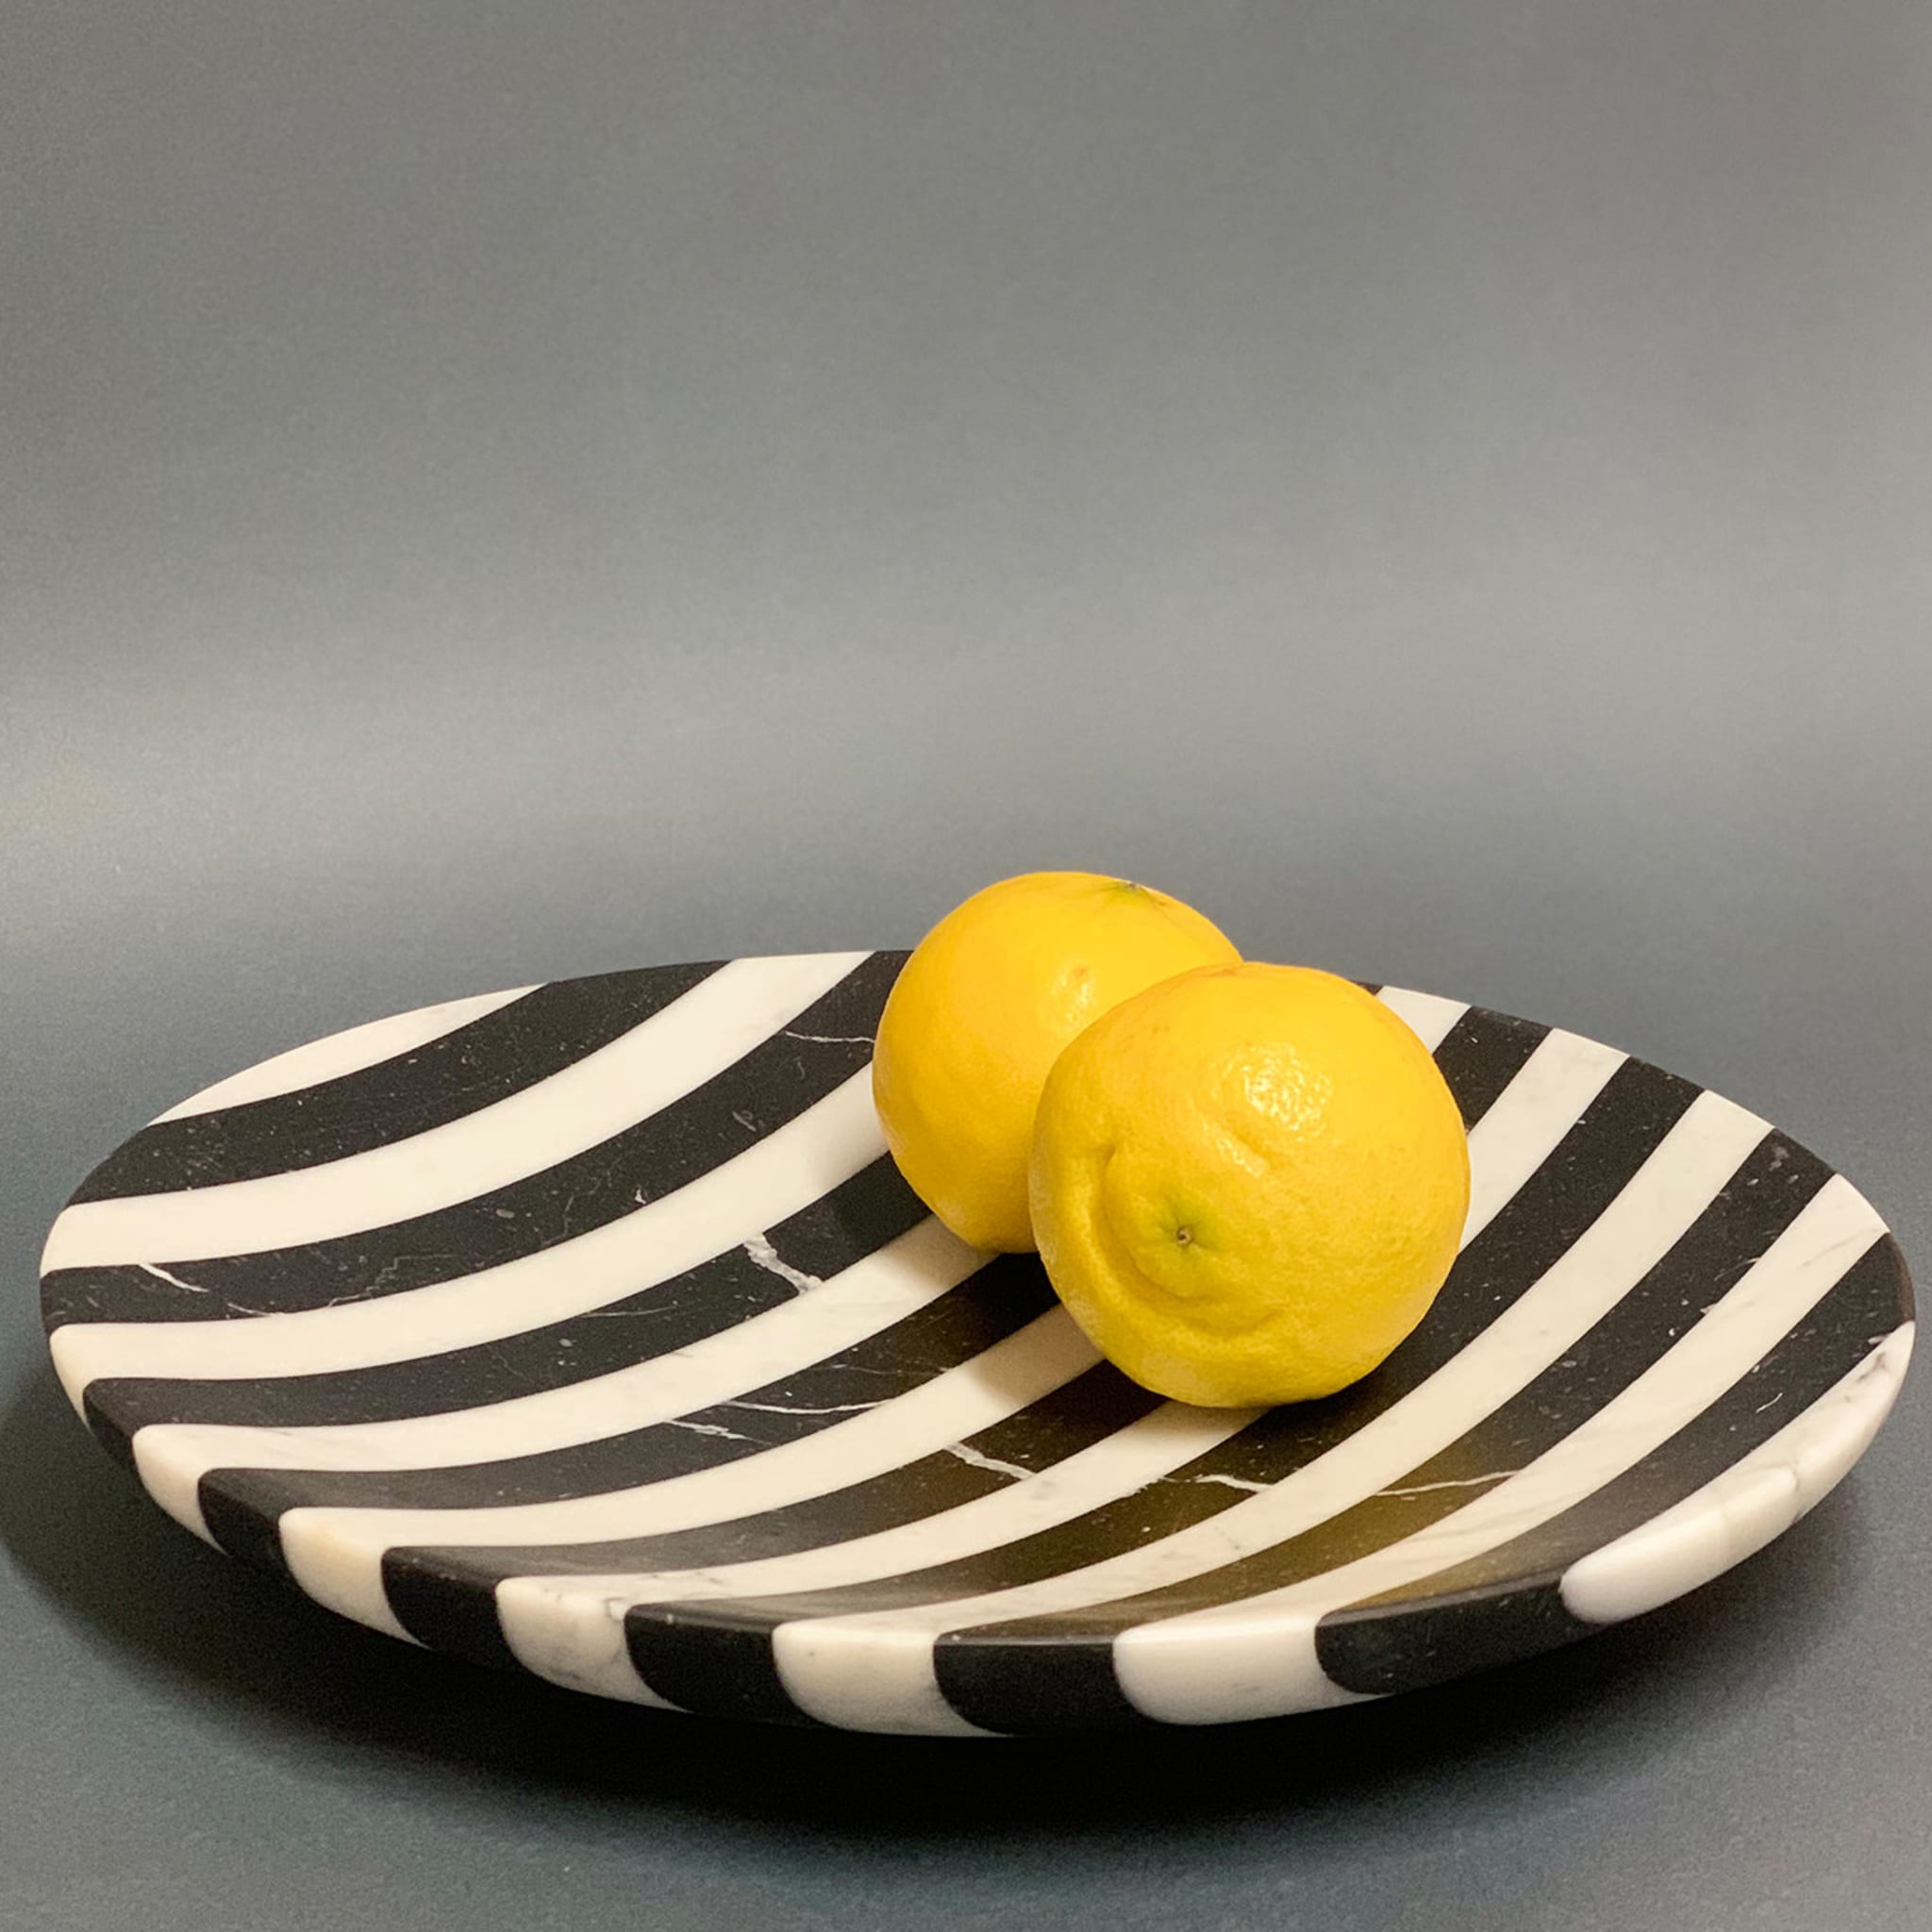 Alice Bowl by Bethan Gray - Alternative view 2